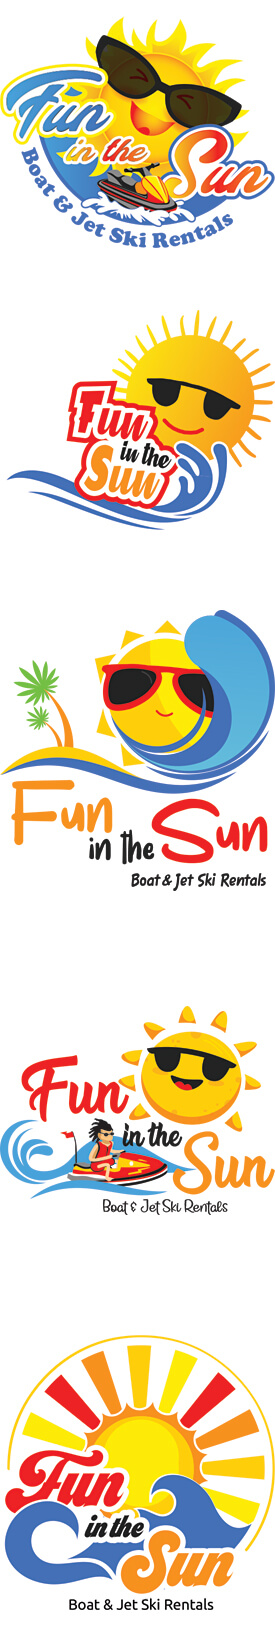 Fun in the Sun - Vacation Rental and Travel Company Logos | Logo Design Services